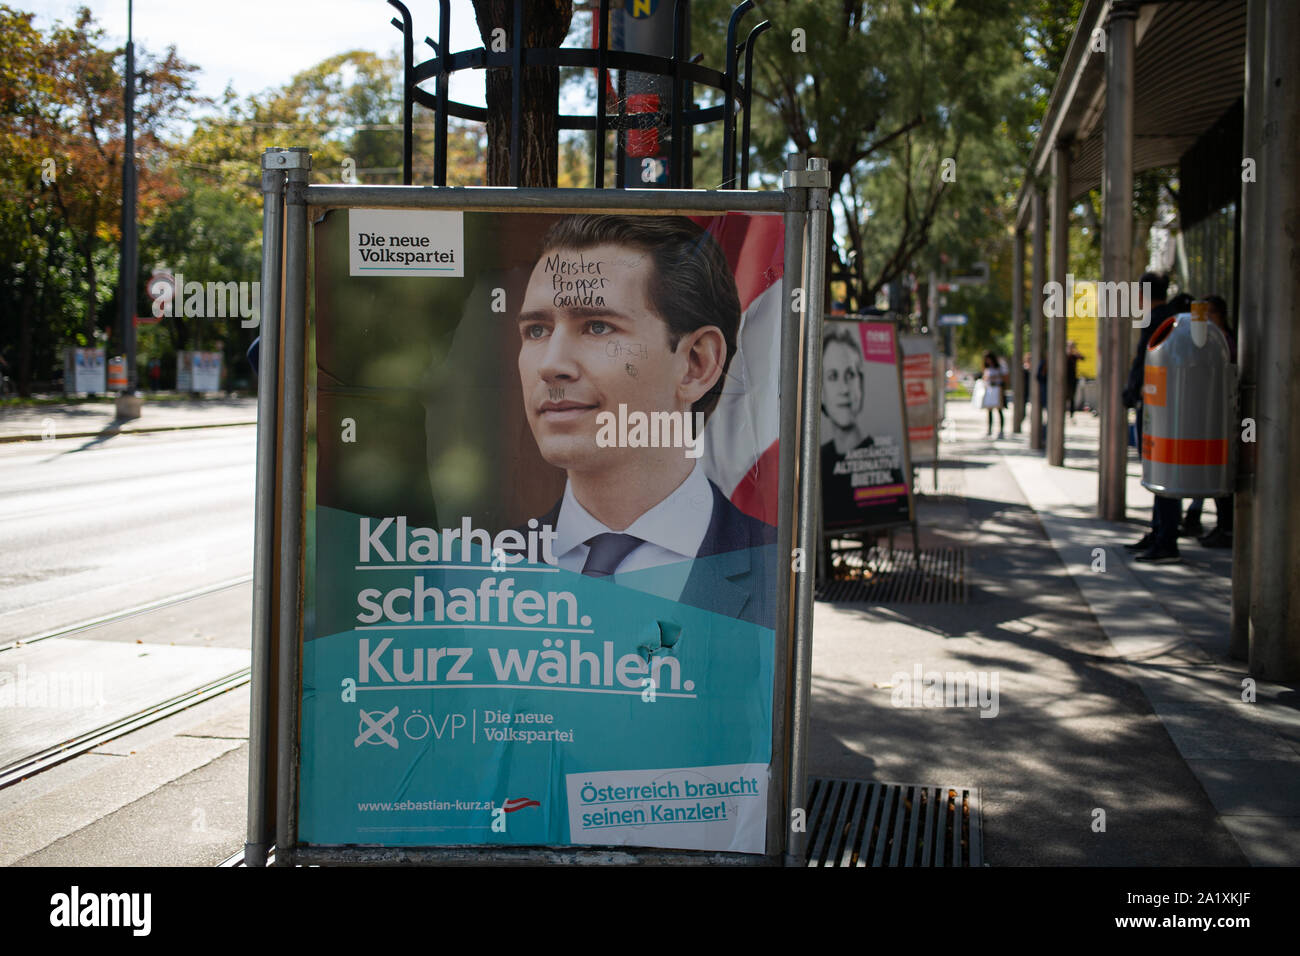 Defaced Campaign Poster during the Austrian Elections September 2019 of Sebastian Kurz, leader of the Austrian People's Party/Österreichische Volkspartei/ÖVP Stock Photo